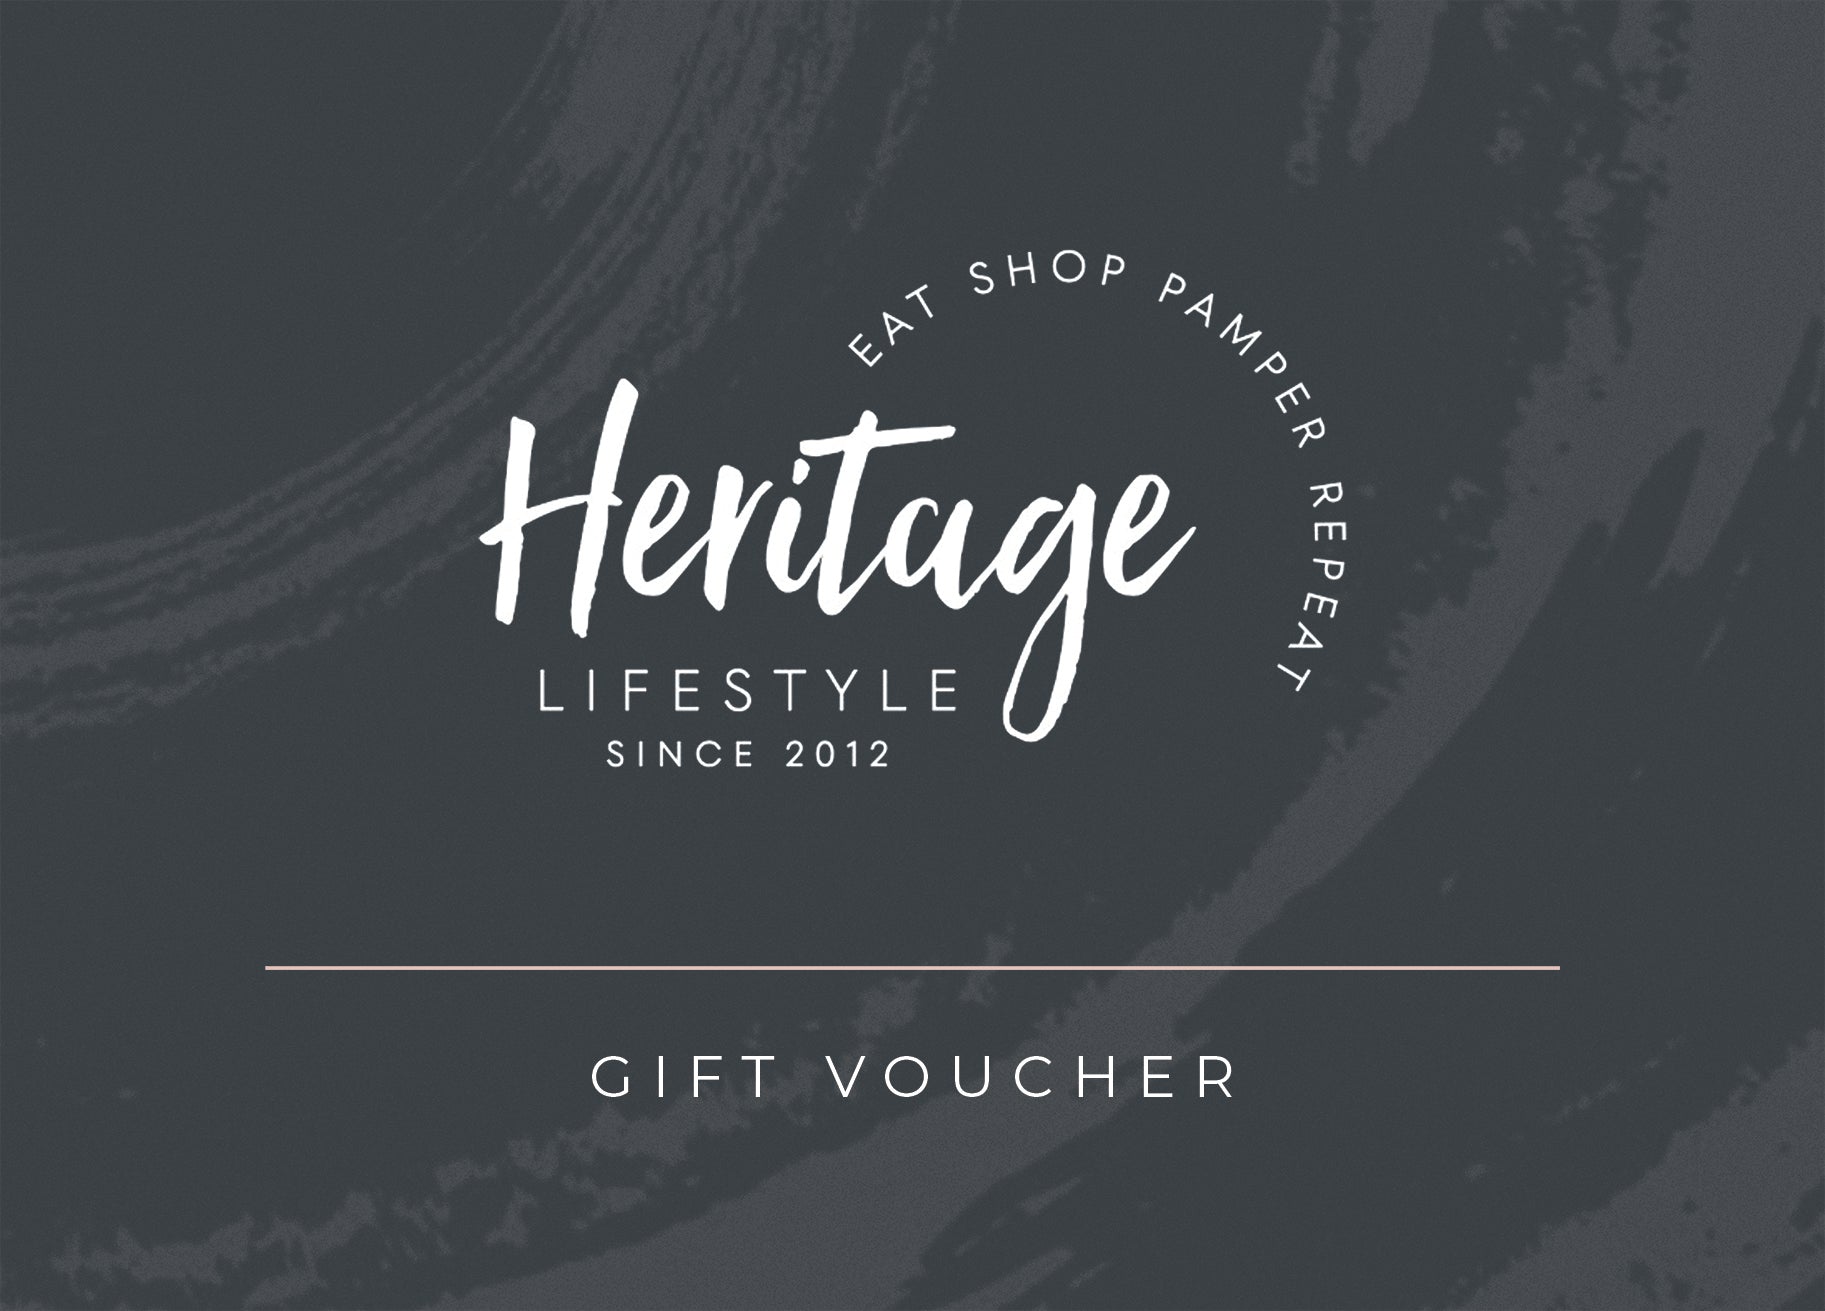 buy a voucher From 99gift Today! by 99 gift - Issuu